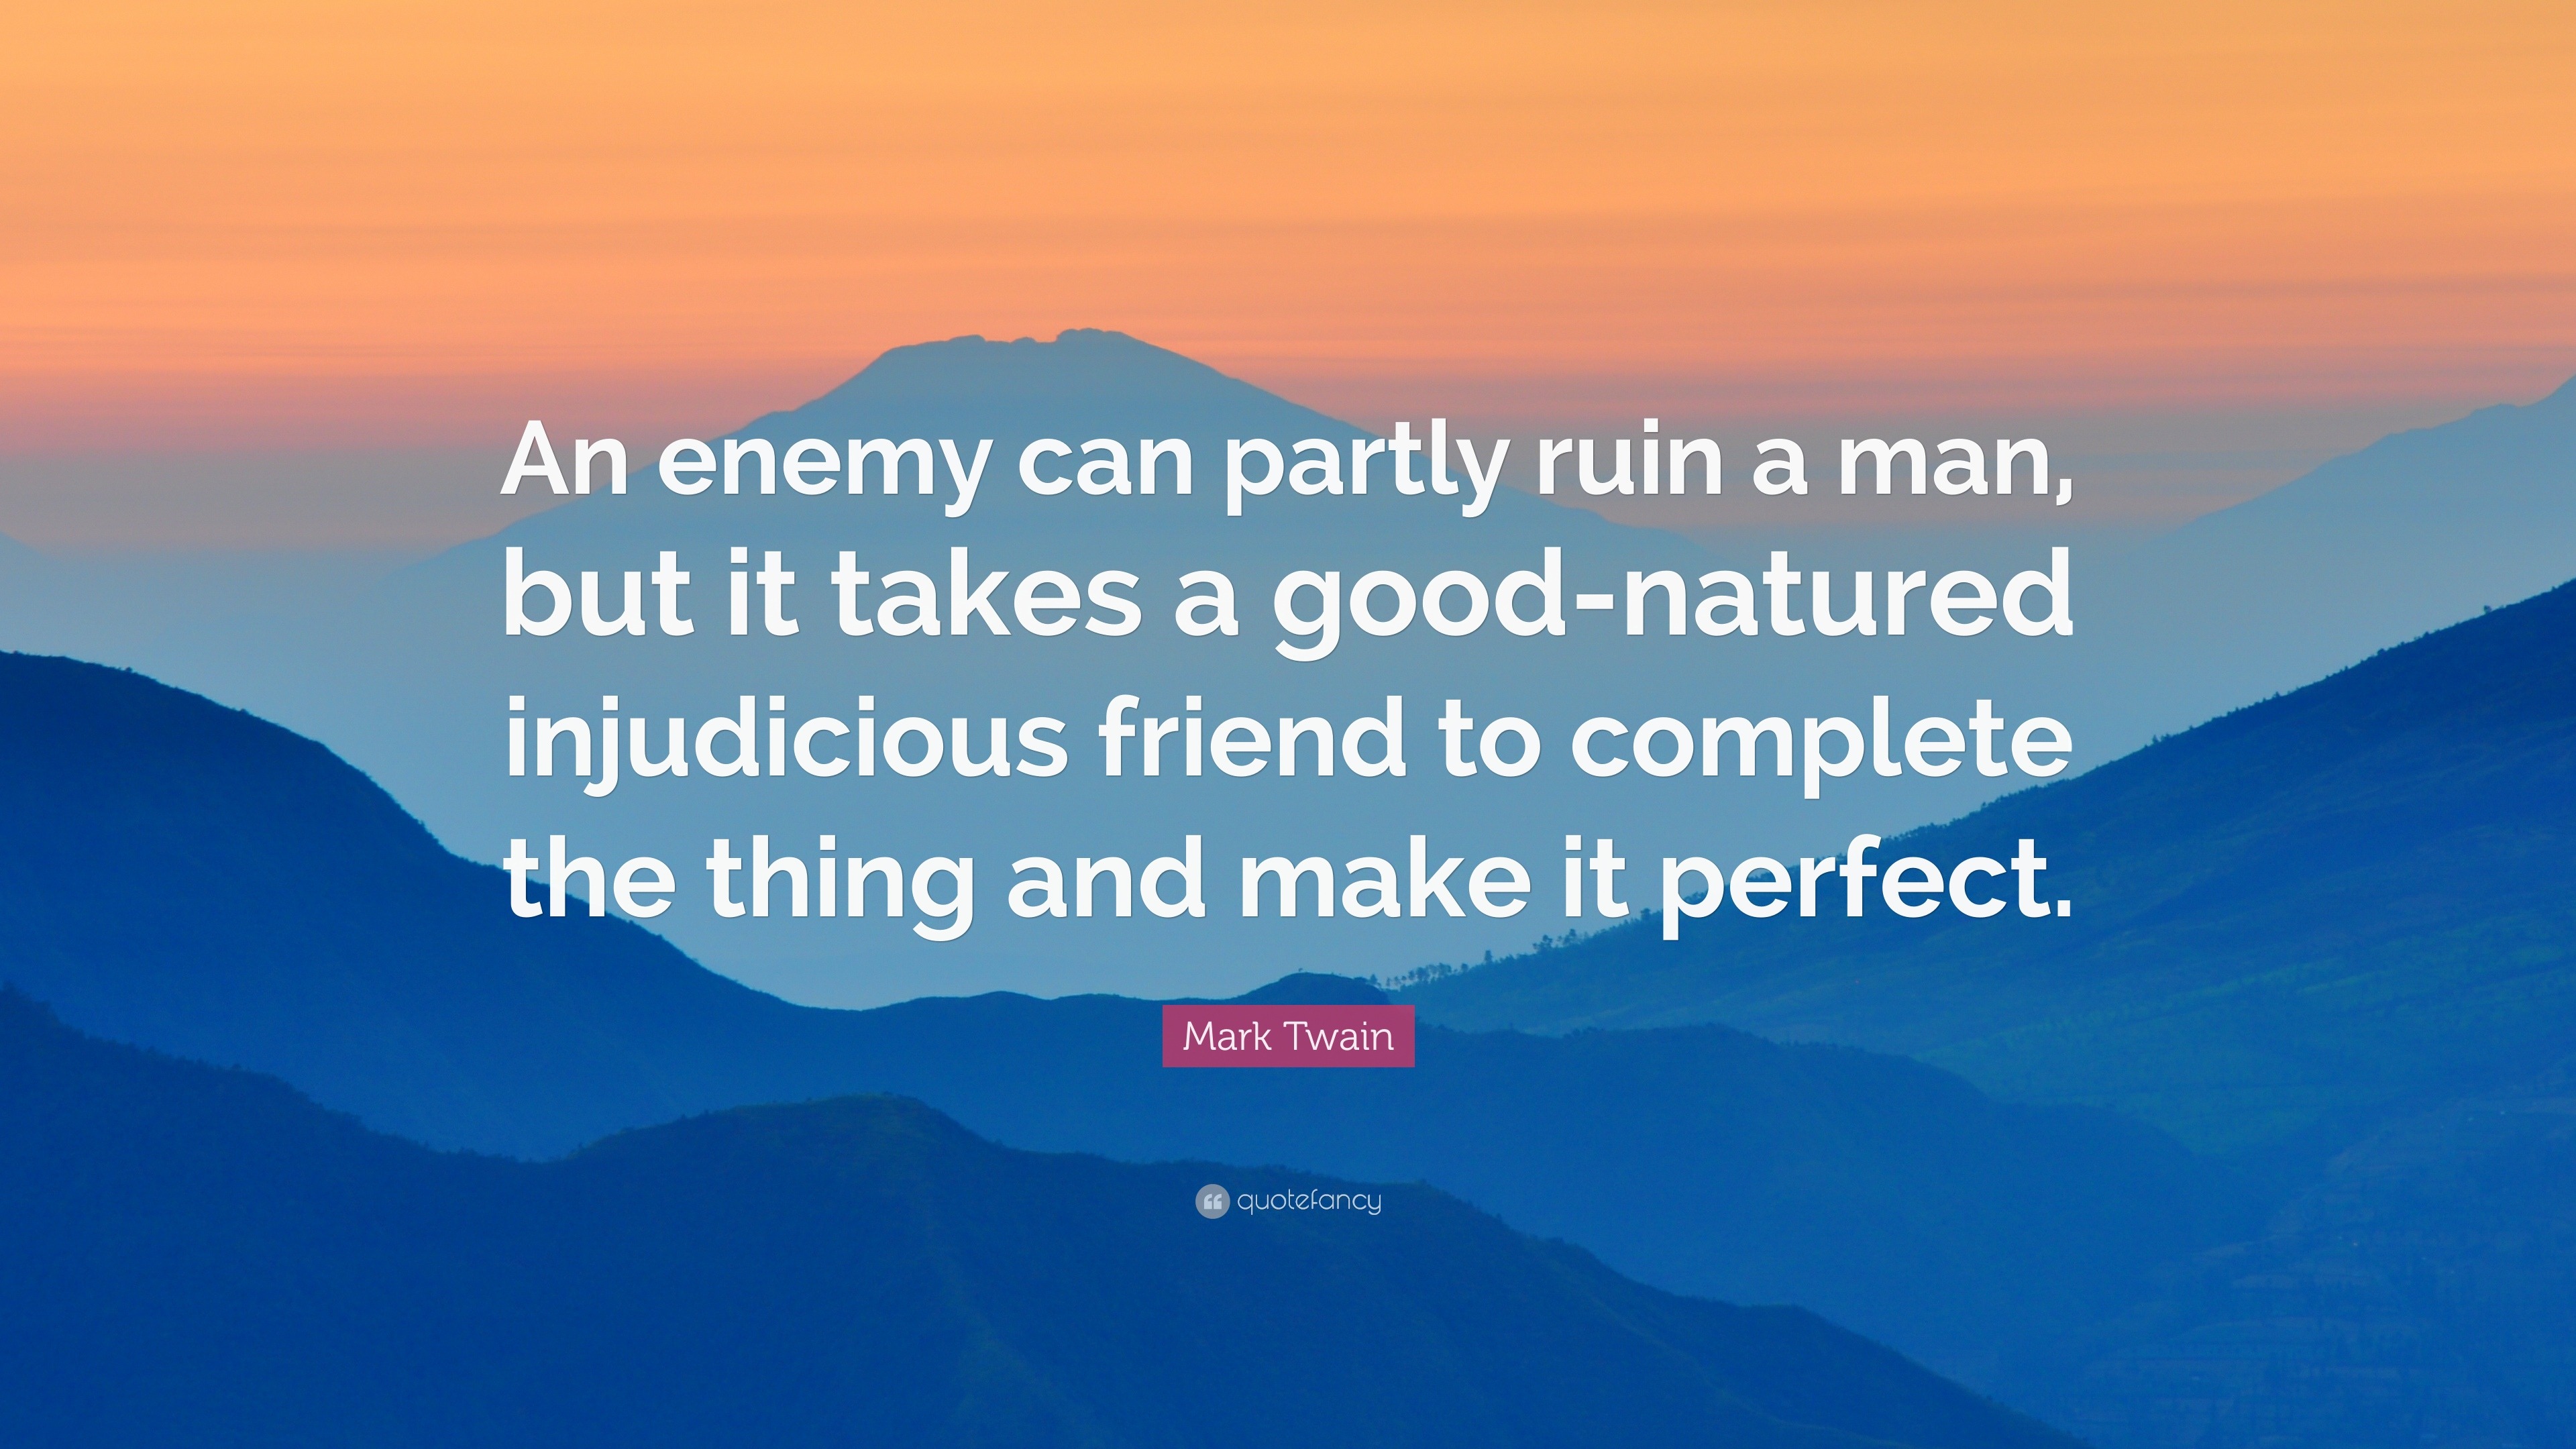 Mark Twain Quote: “An enemy can partly ruin a man, but it takes a good ...